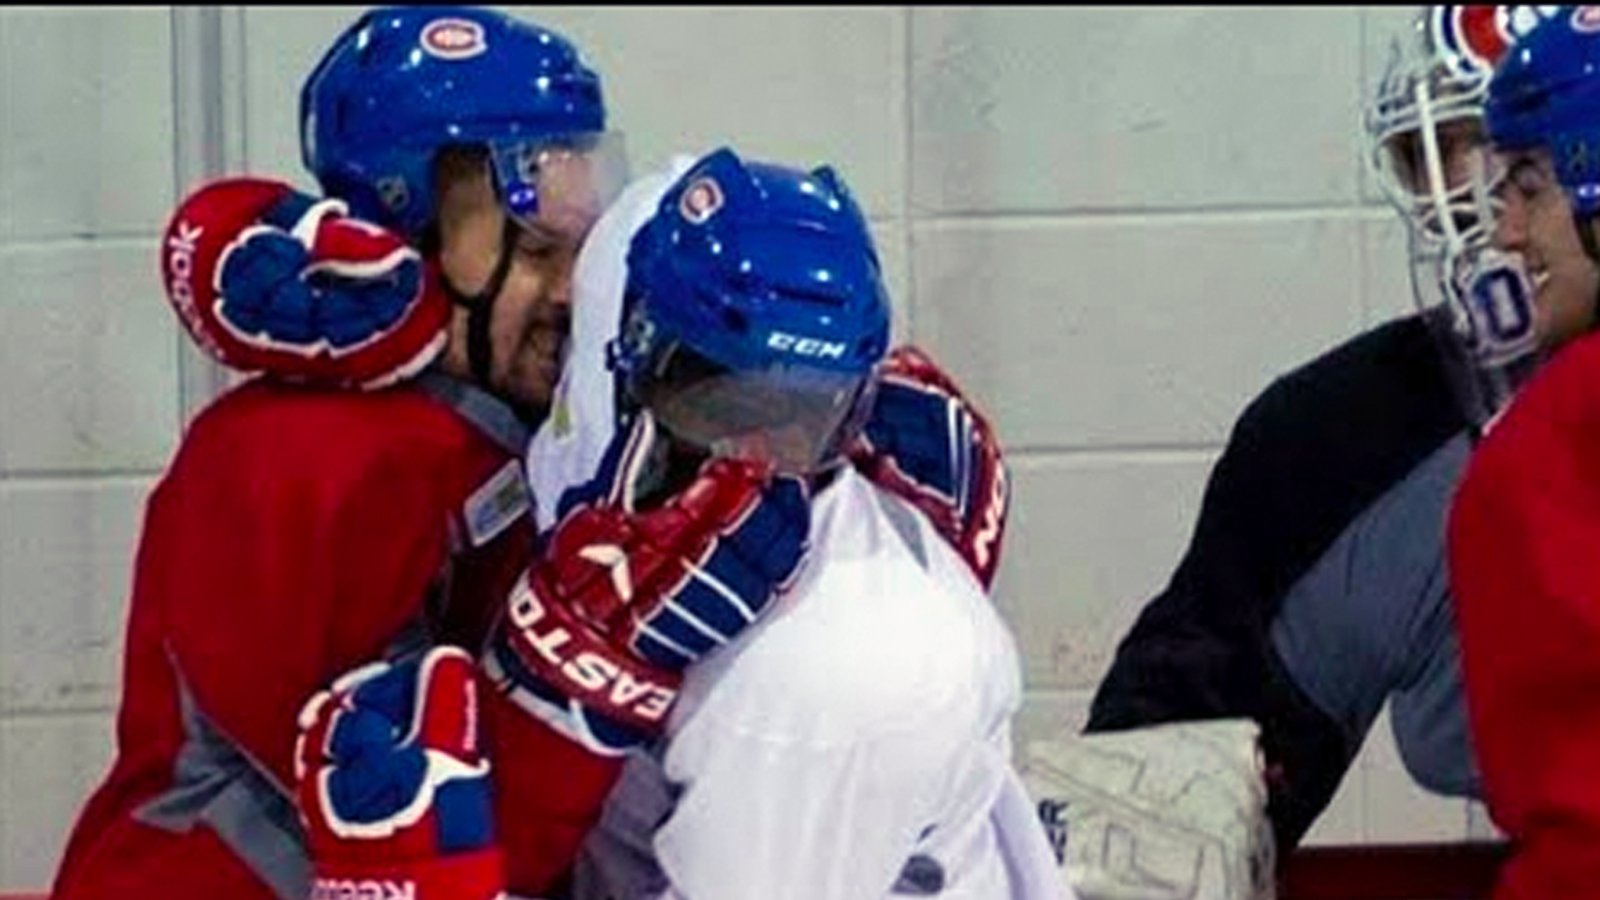 10 times where NHL teammates went at it in practice